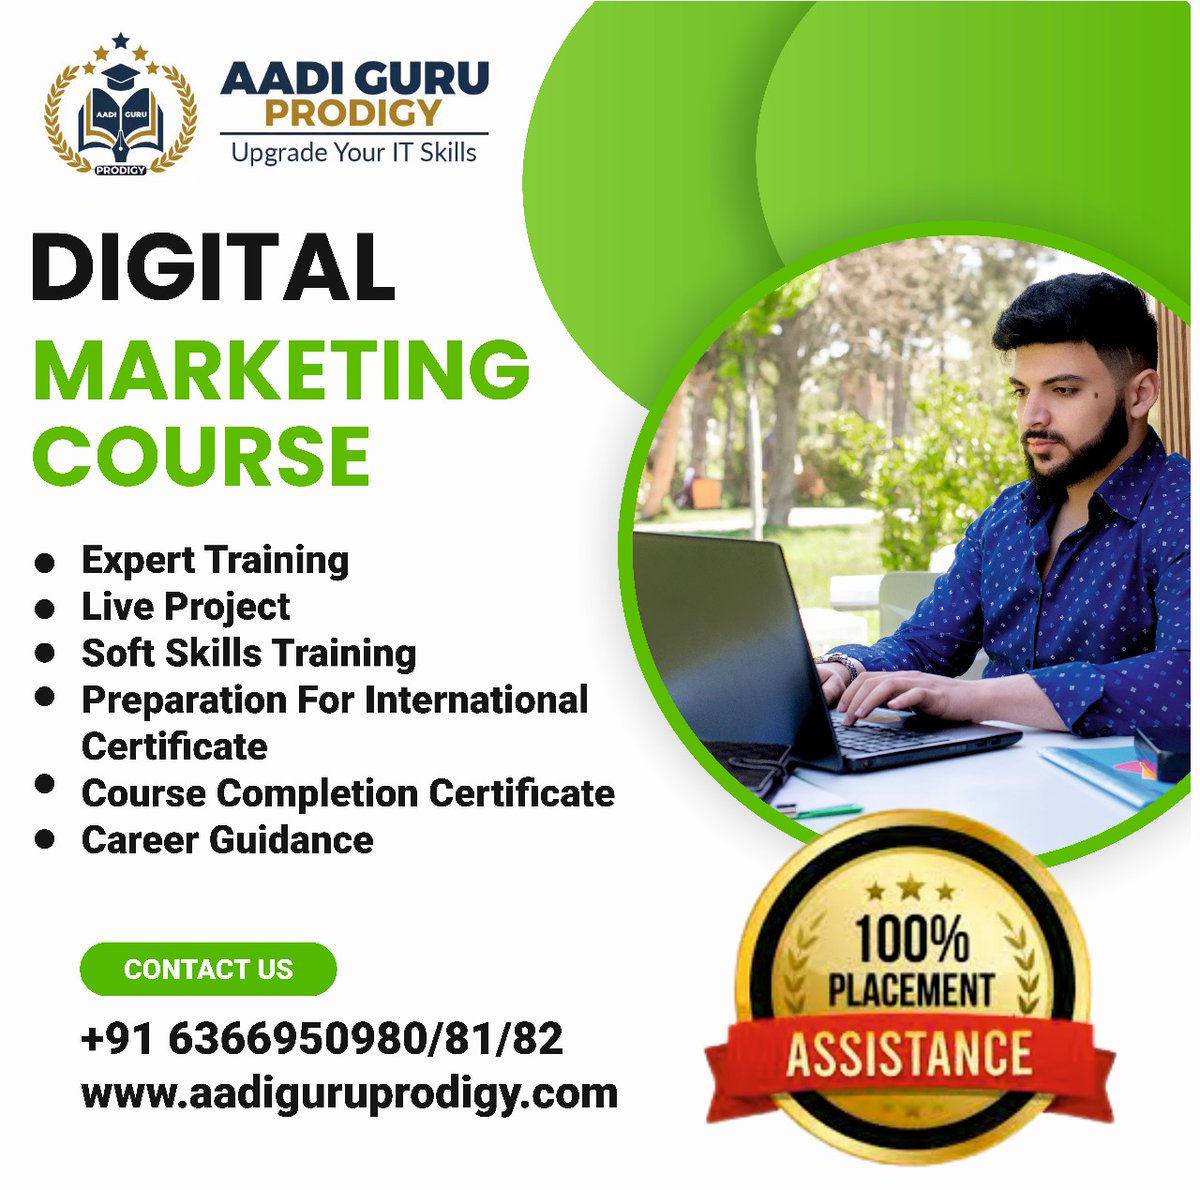 '🌐 Digital Marketing Mastery Awaits! Enrol Today for Expert Insights 💻📣'

'Stay ahead in the digital game! Our course covers SEO, PPC, and more. Become a digital marketing pro with hands-on experience.

Register Now: forms.gle/pVmSVc4PA2xaY8…